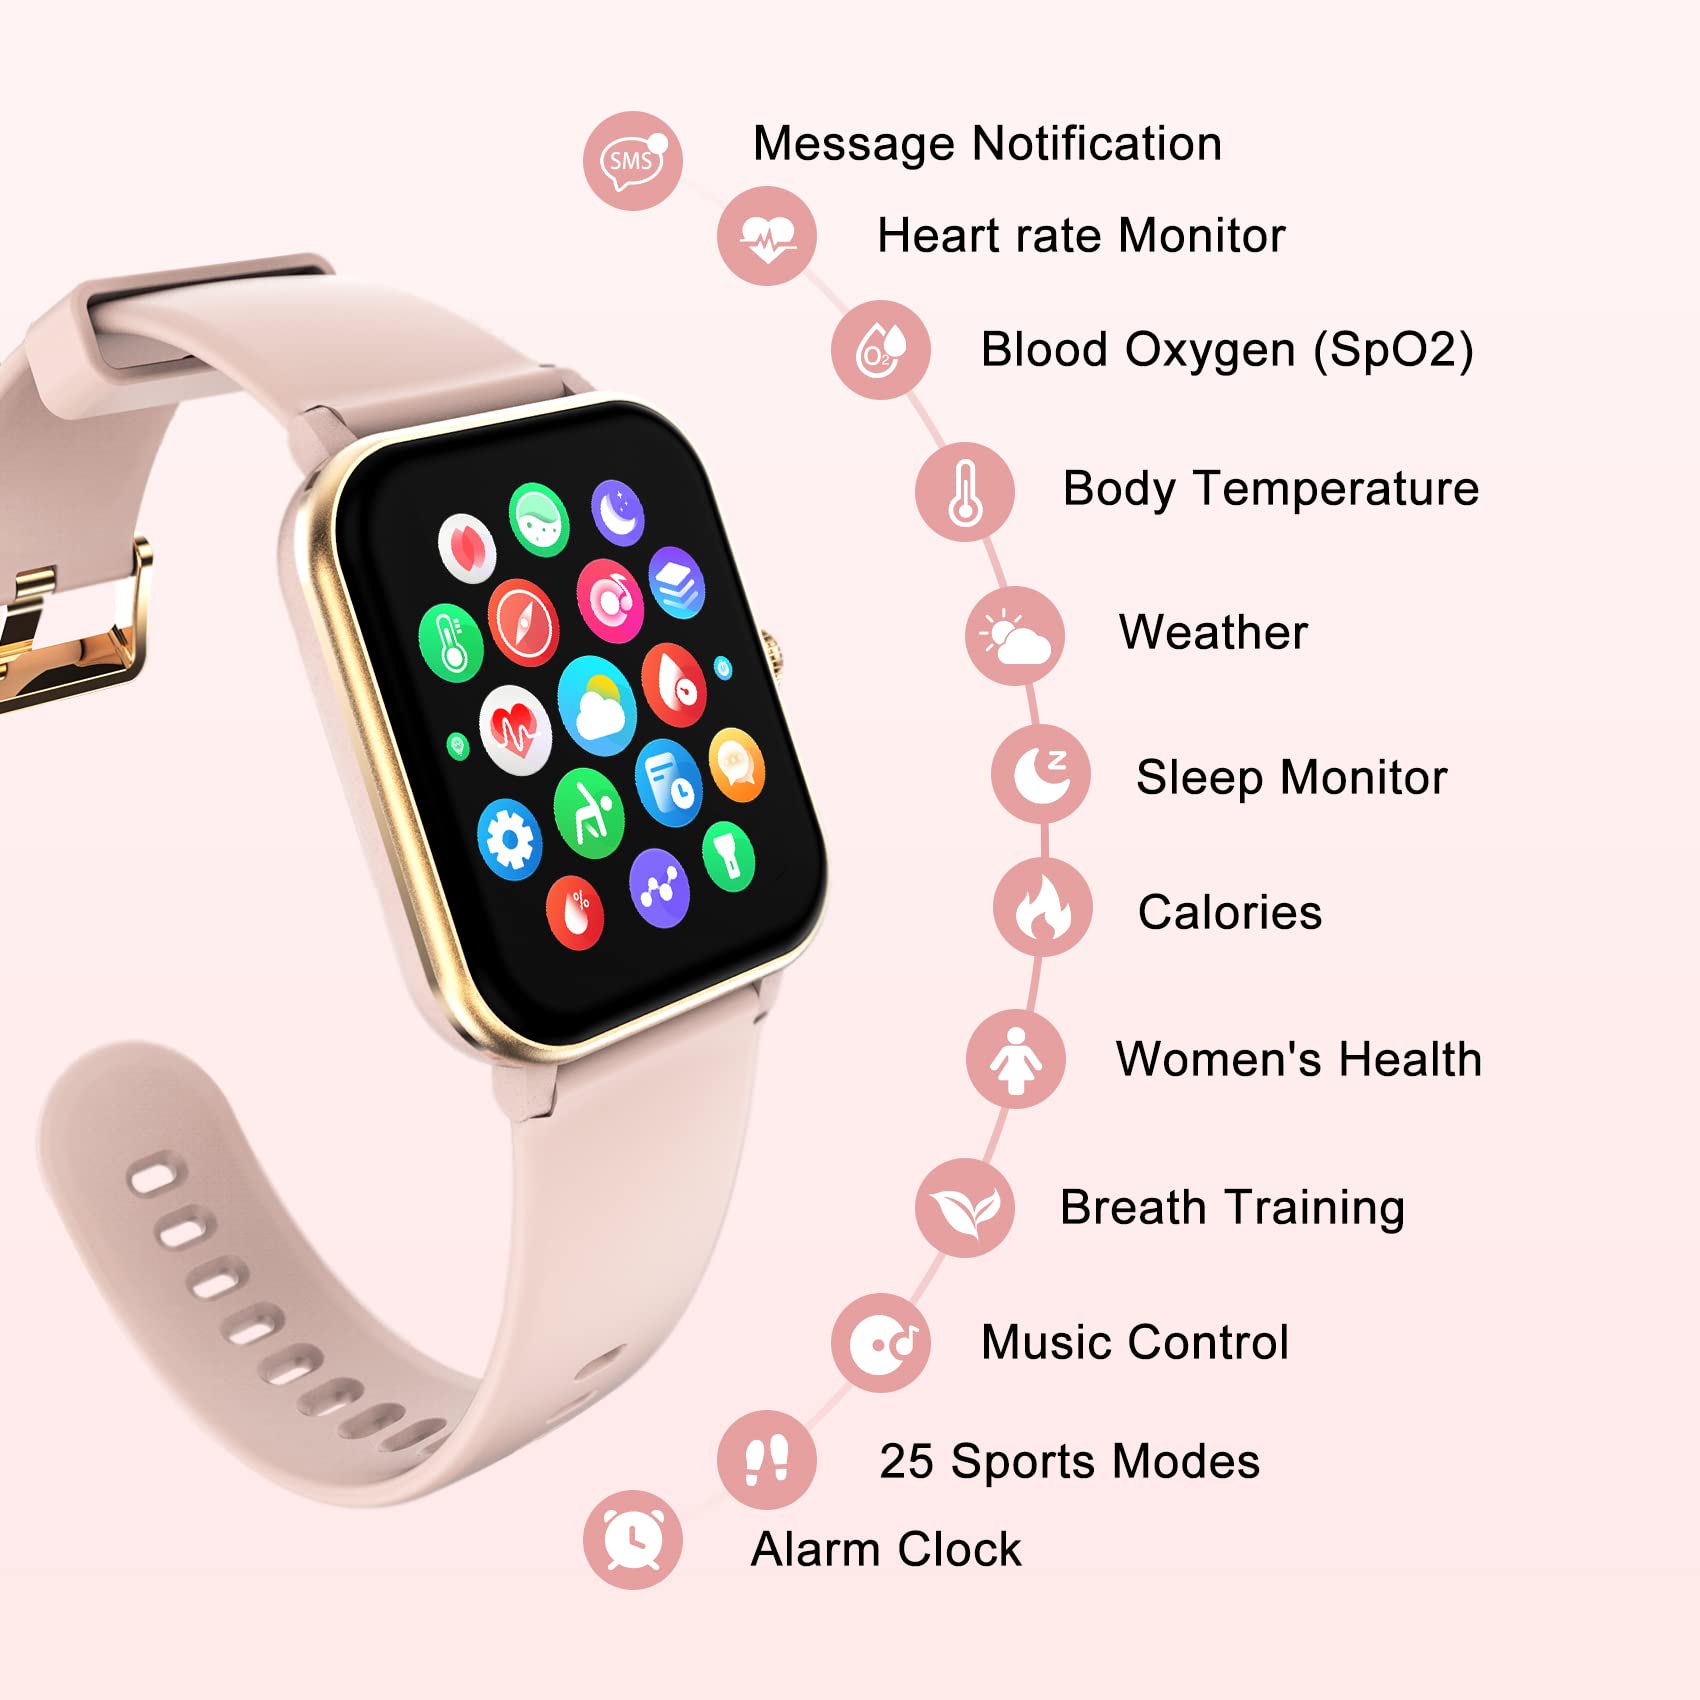 IOWODO Smart Watch for Women, Fitness Tracker with Waterproof IP68,Heart Rate Monitor,Blood Oxygen(SpO2),Pedometer,Stopwatch,25 Sport Modes,Body Thermometer,Weather,Smartwatch for Android iOS